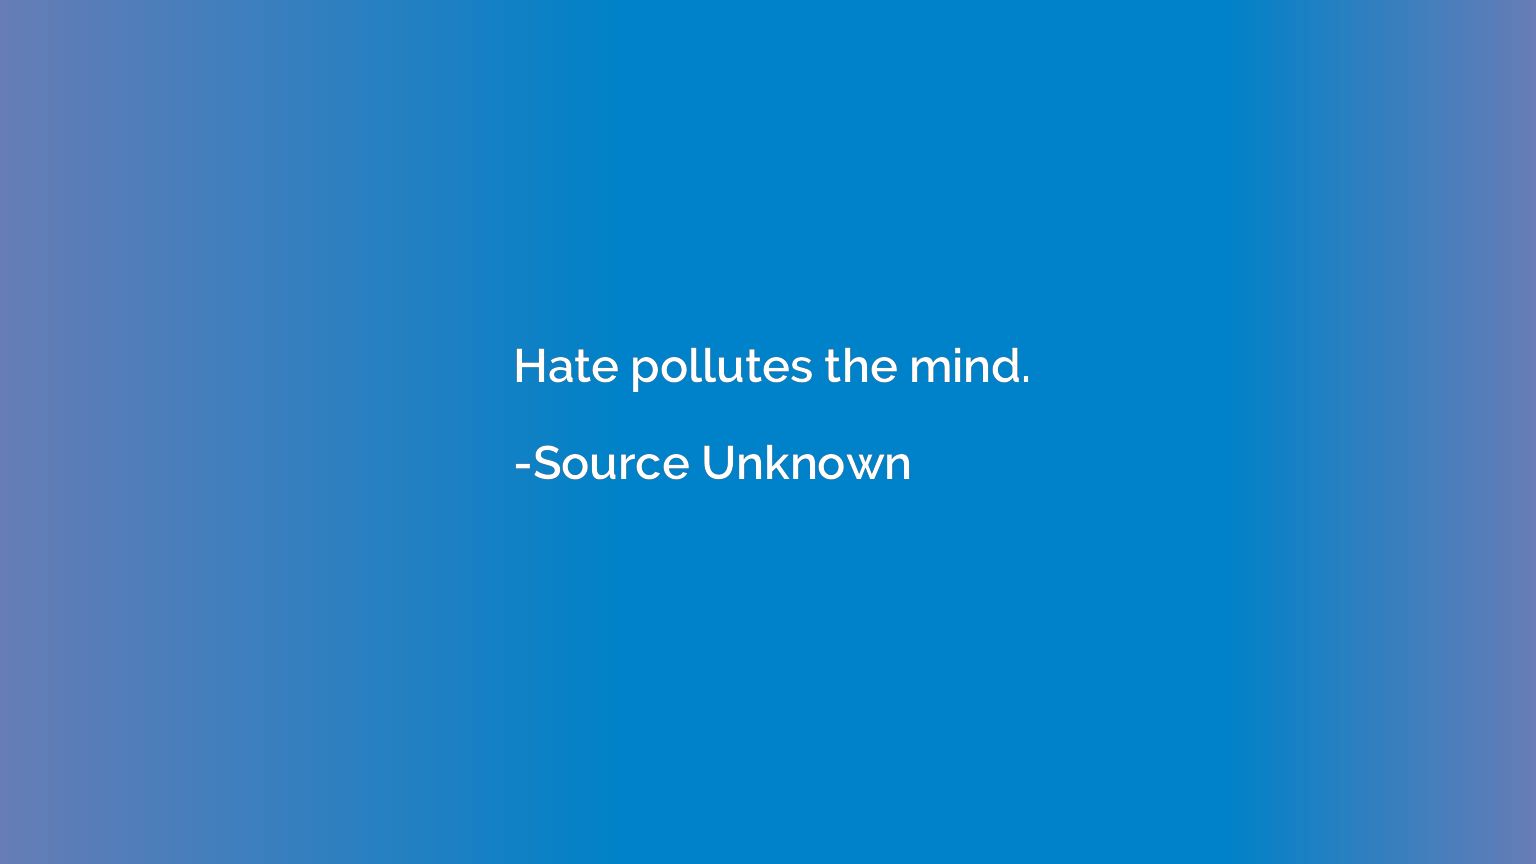 Hate pollutes the mind.